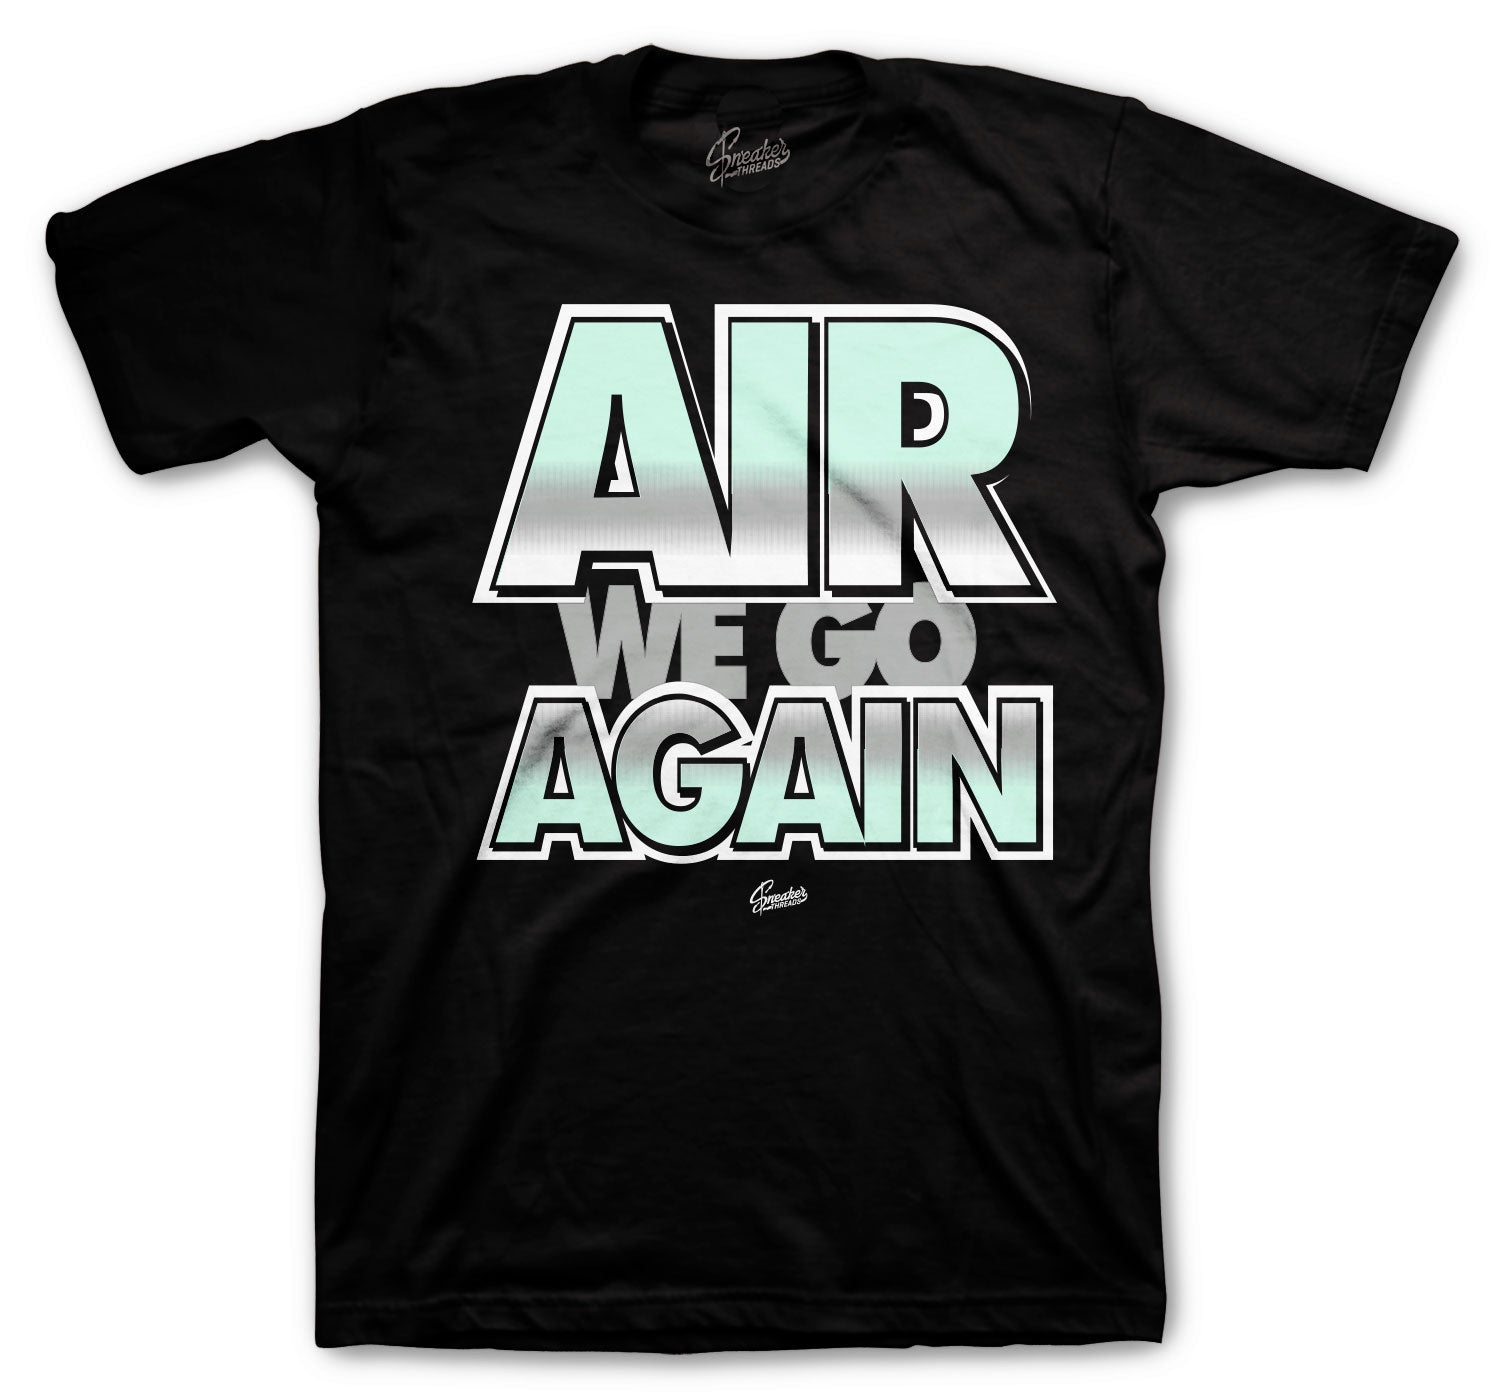 Barely Green All Star Shirt - Air We go - Black